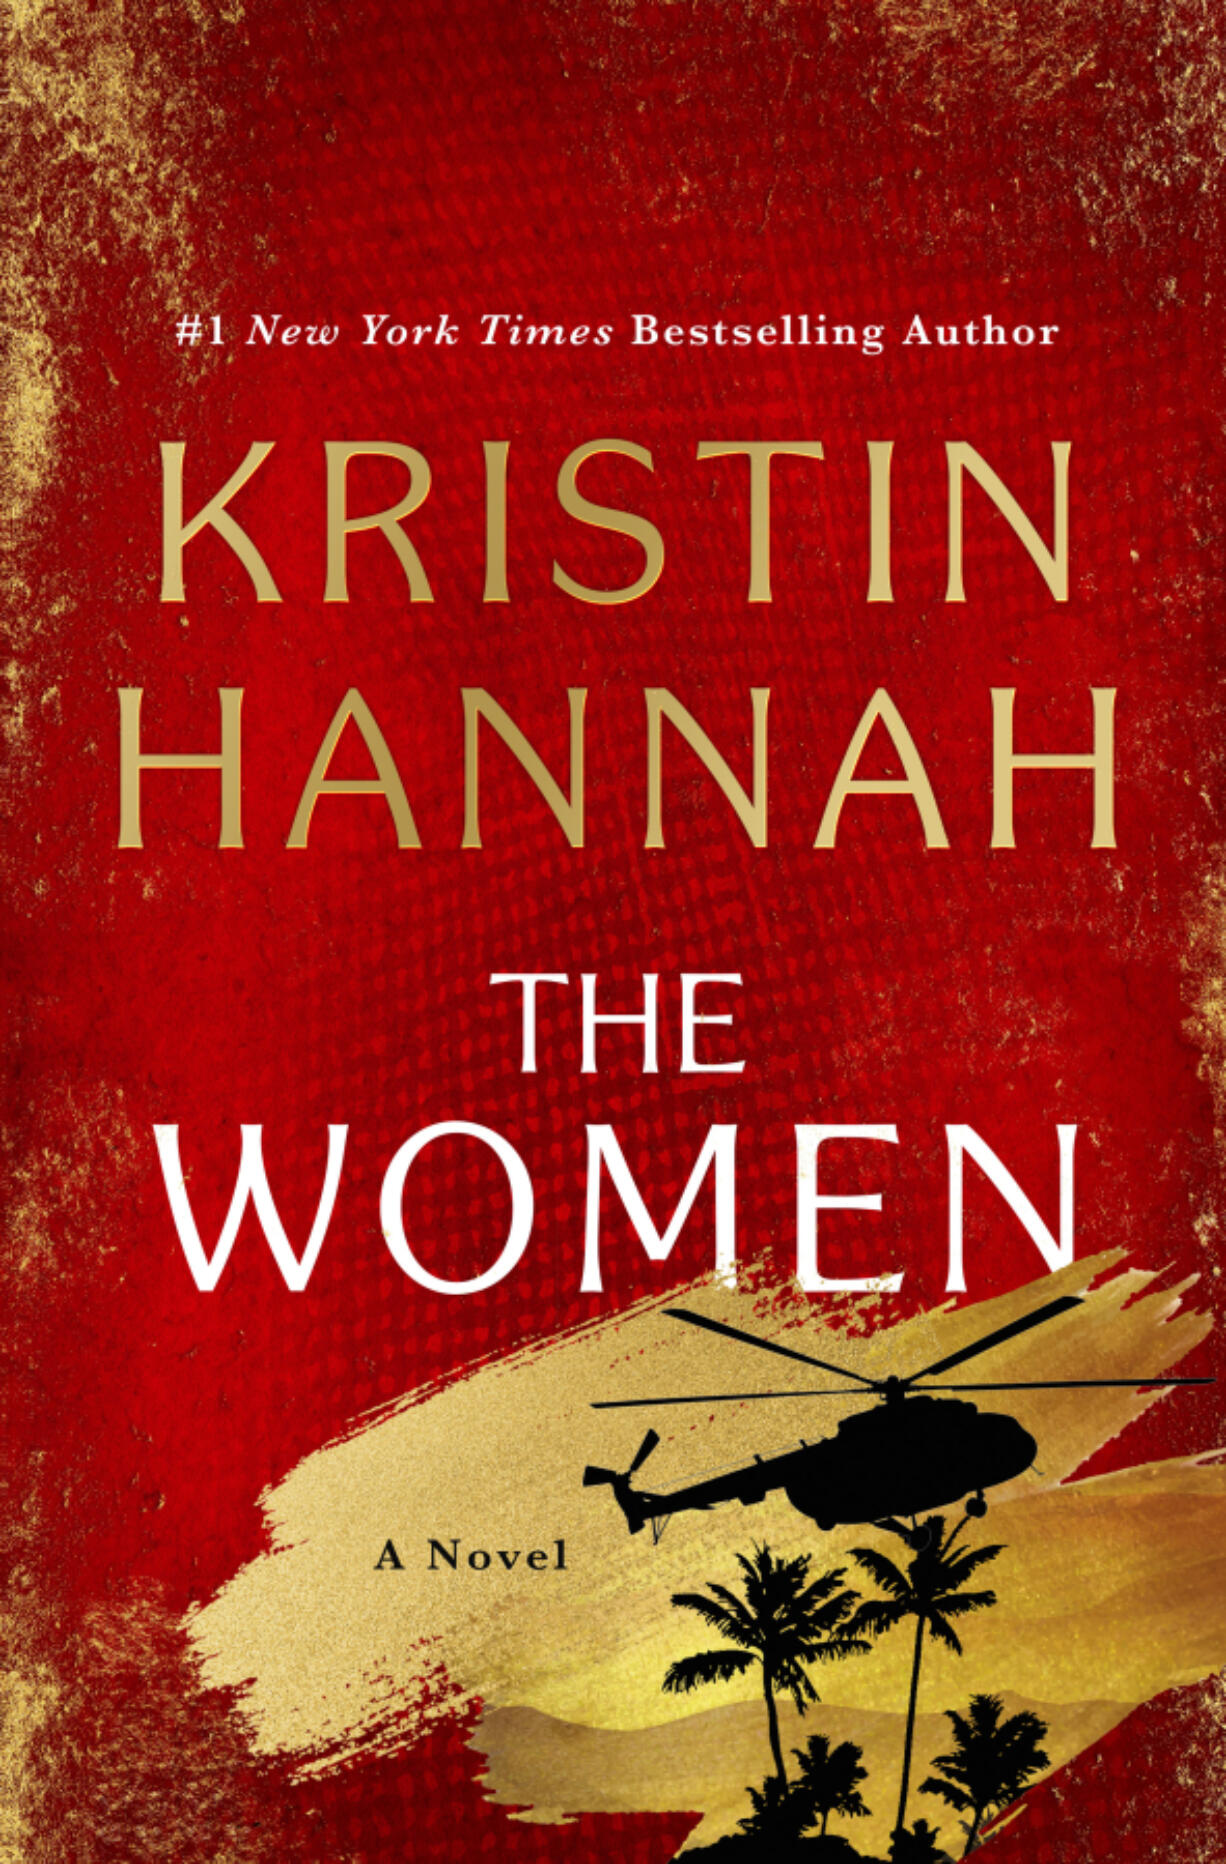 &ldquo;The Vietnam War was such a shadow across my childhood,&rdquo; Hannah says of her earliest inspiration for her new novel, &ldquo;The Women.&rdquo; &ldquo;My friends&rsquo; fathers were serving, and in fact, my best friend&rsquo;s father was shot down and lost.&rdquo;The Women.&rdquo; (St.